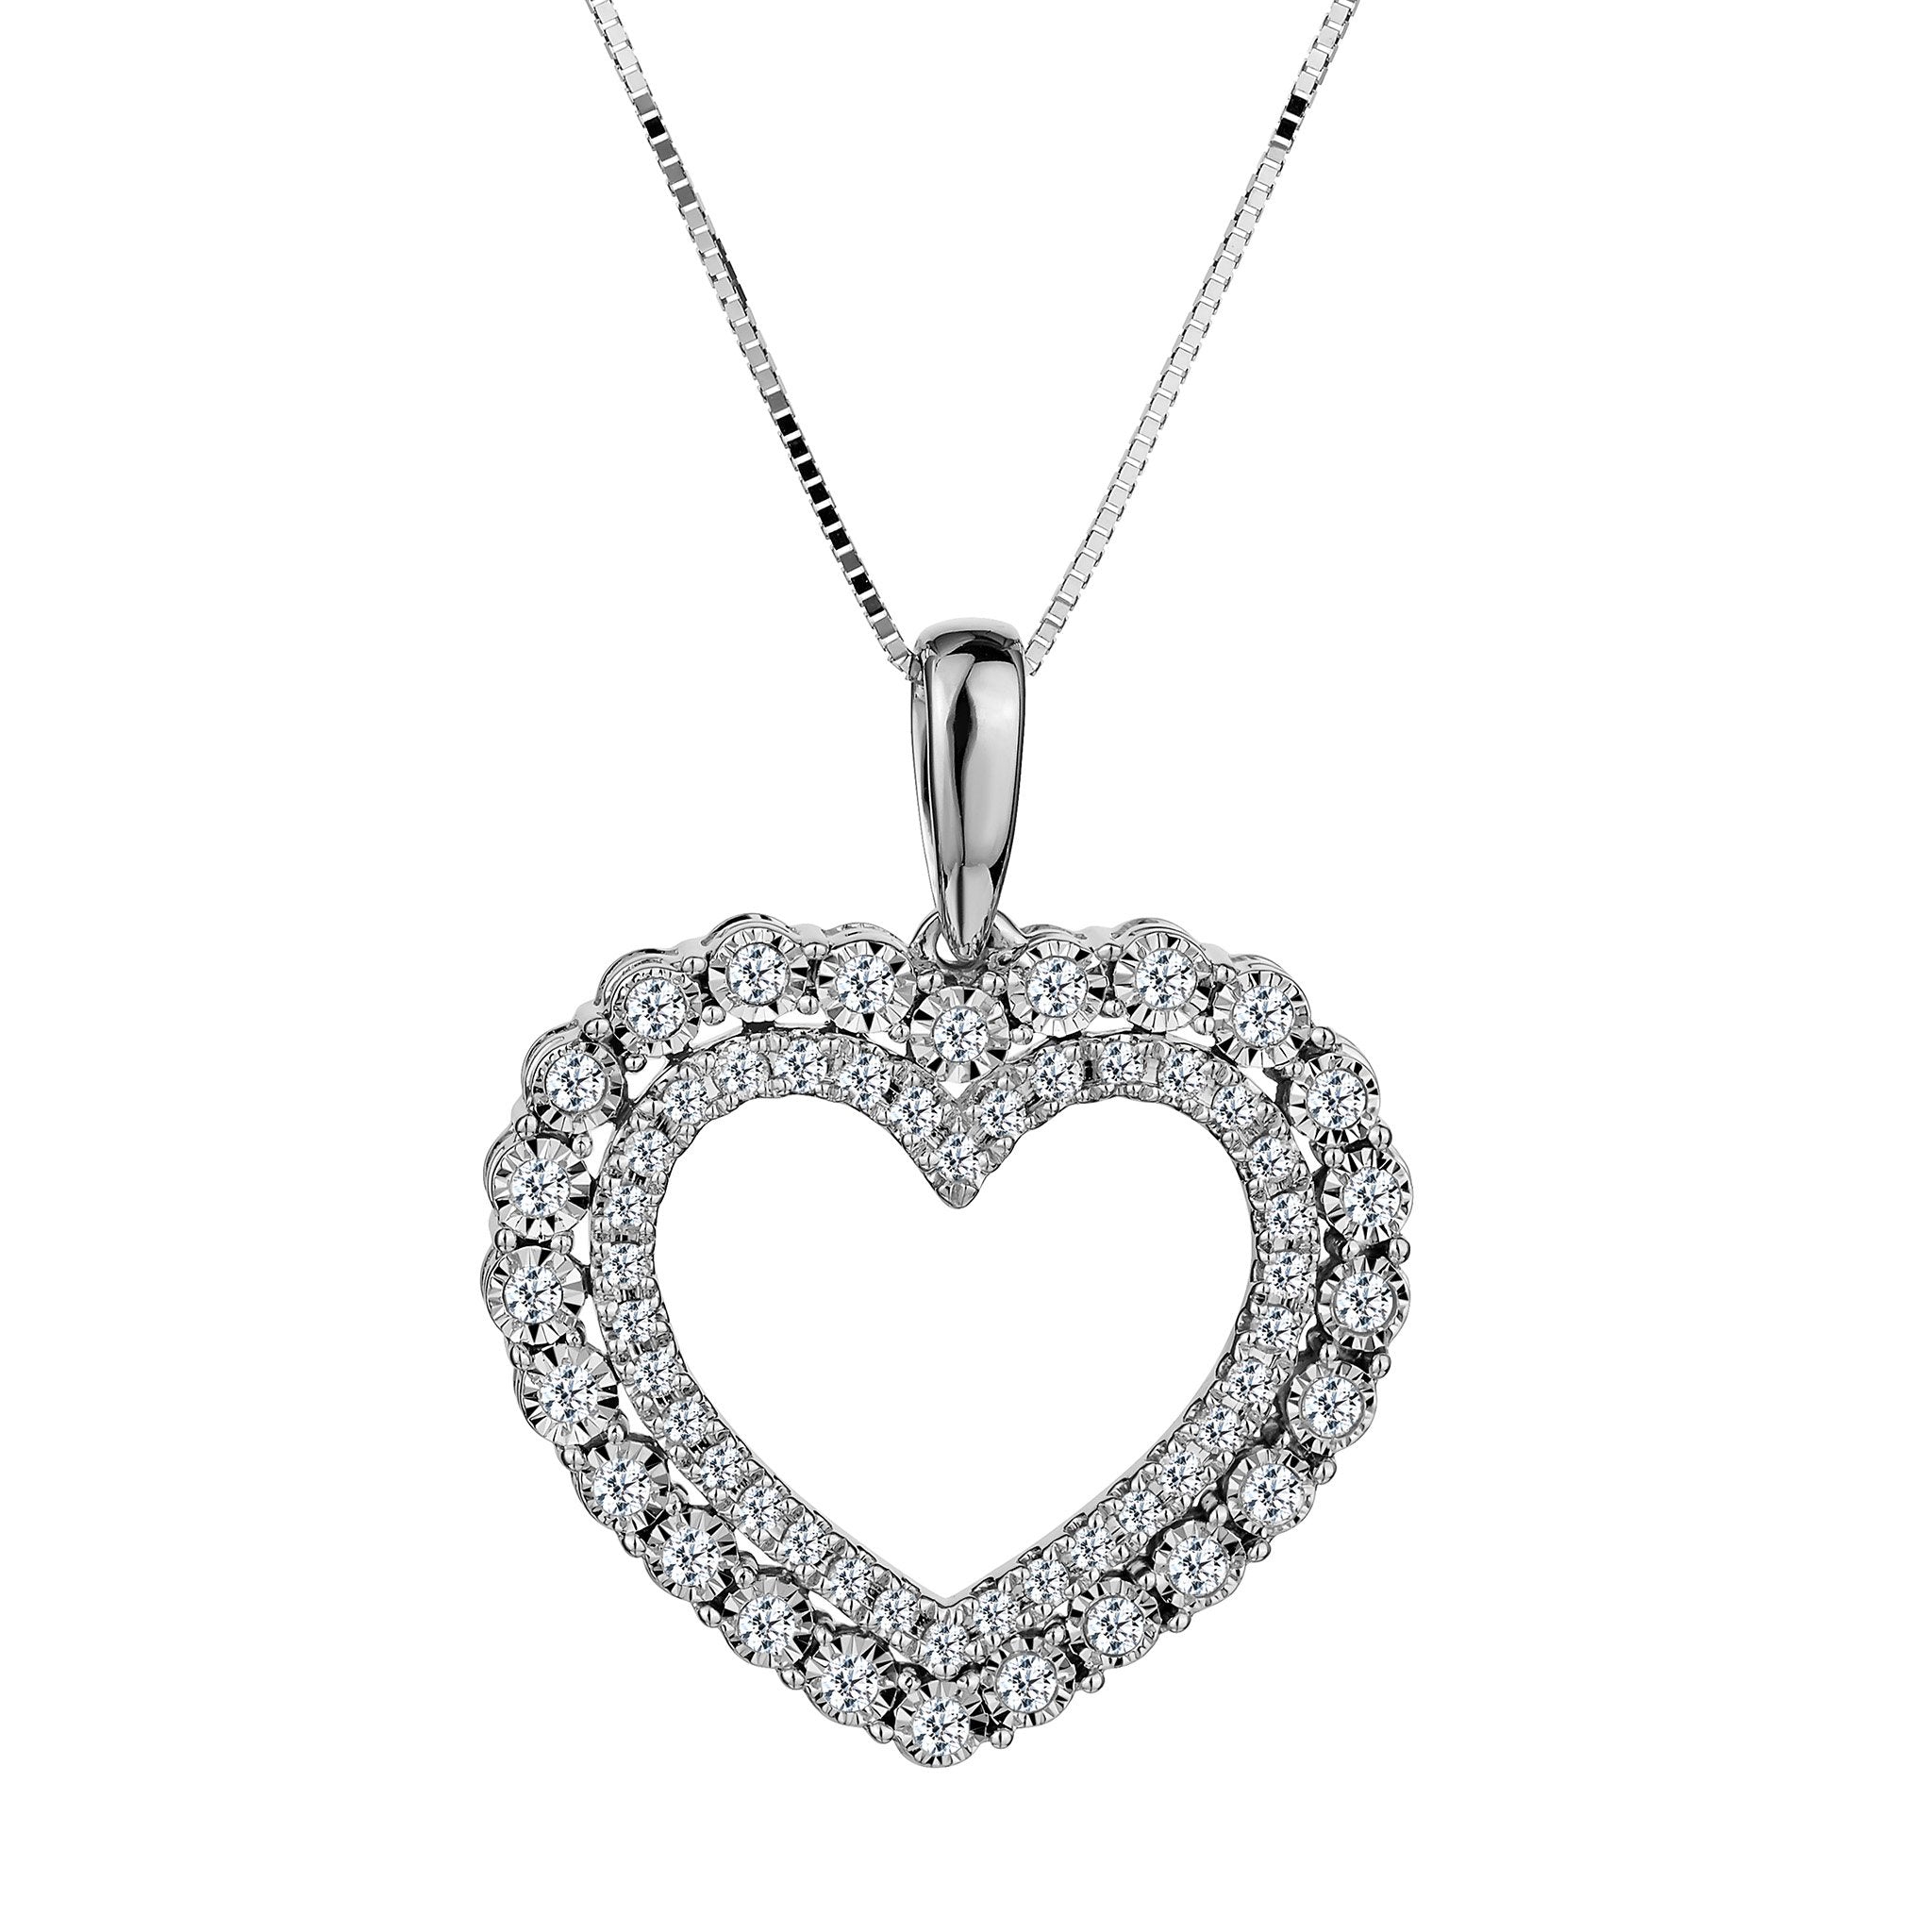 .53 CARAT DIAMOND "MIRACLE" PAVE HEART PENDANT, 10kt WHITE GOLD…...................NOW